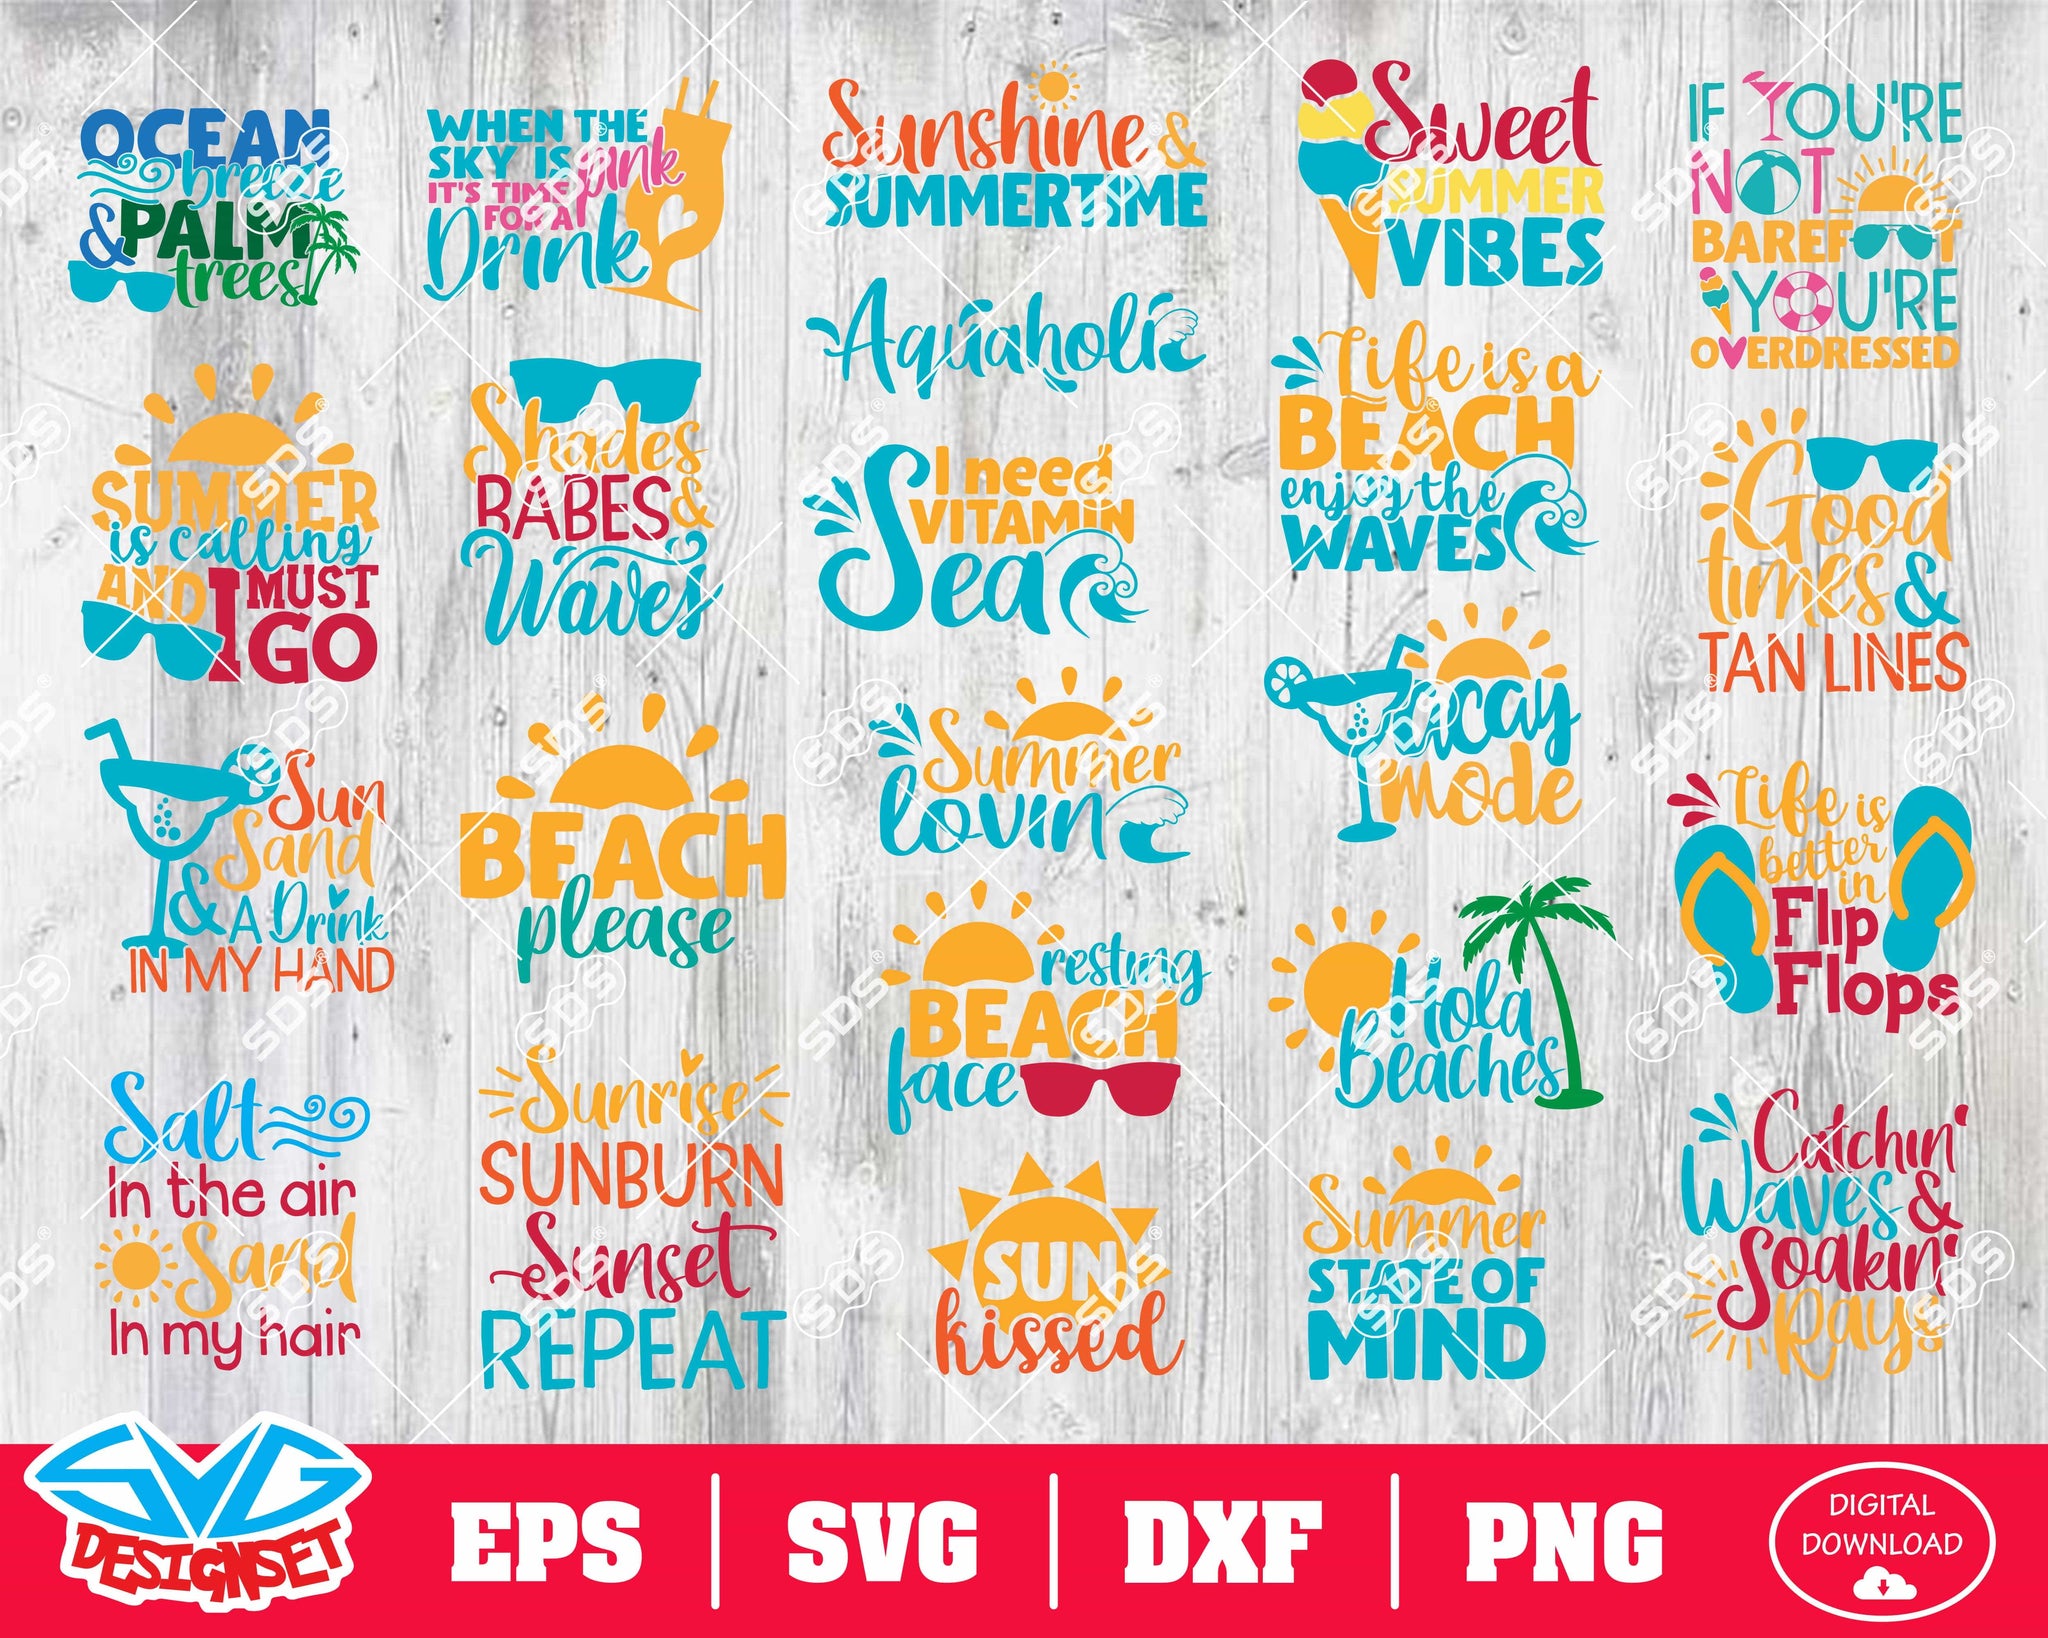 Summertime Quotes Bundle Svg, Dxf, Eps, Png, Clipart, Silhouette and Cutfiles - SVGDesignSets